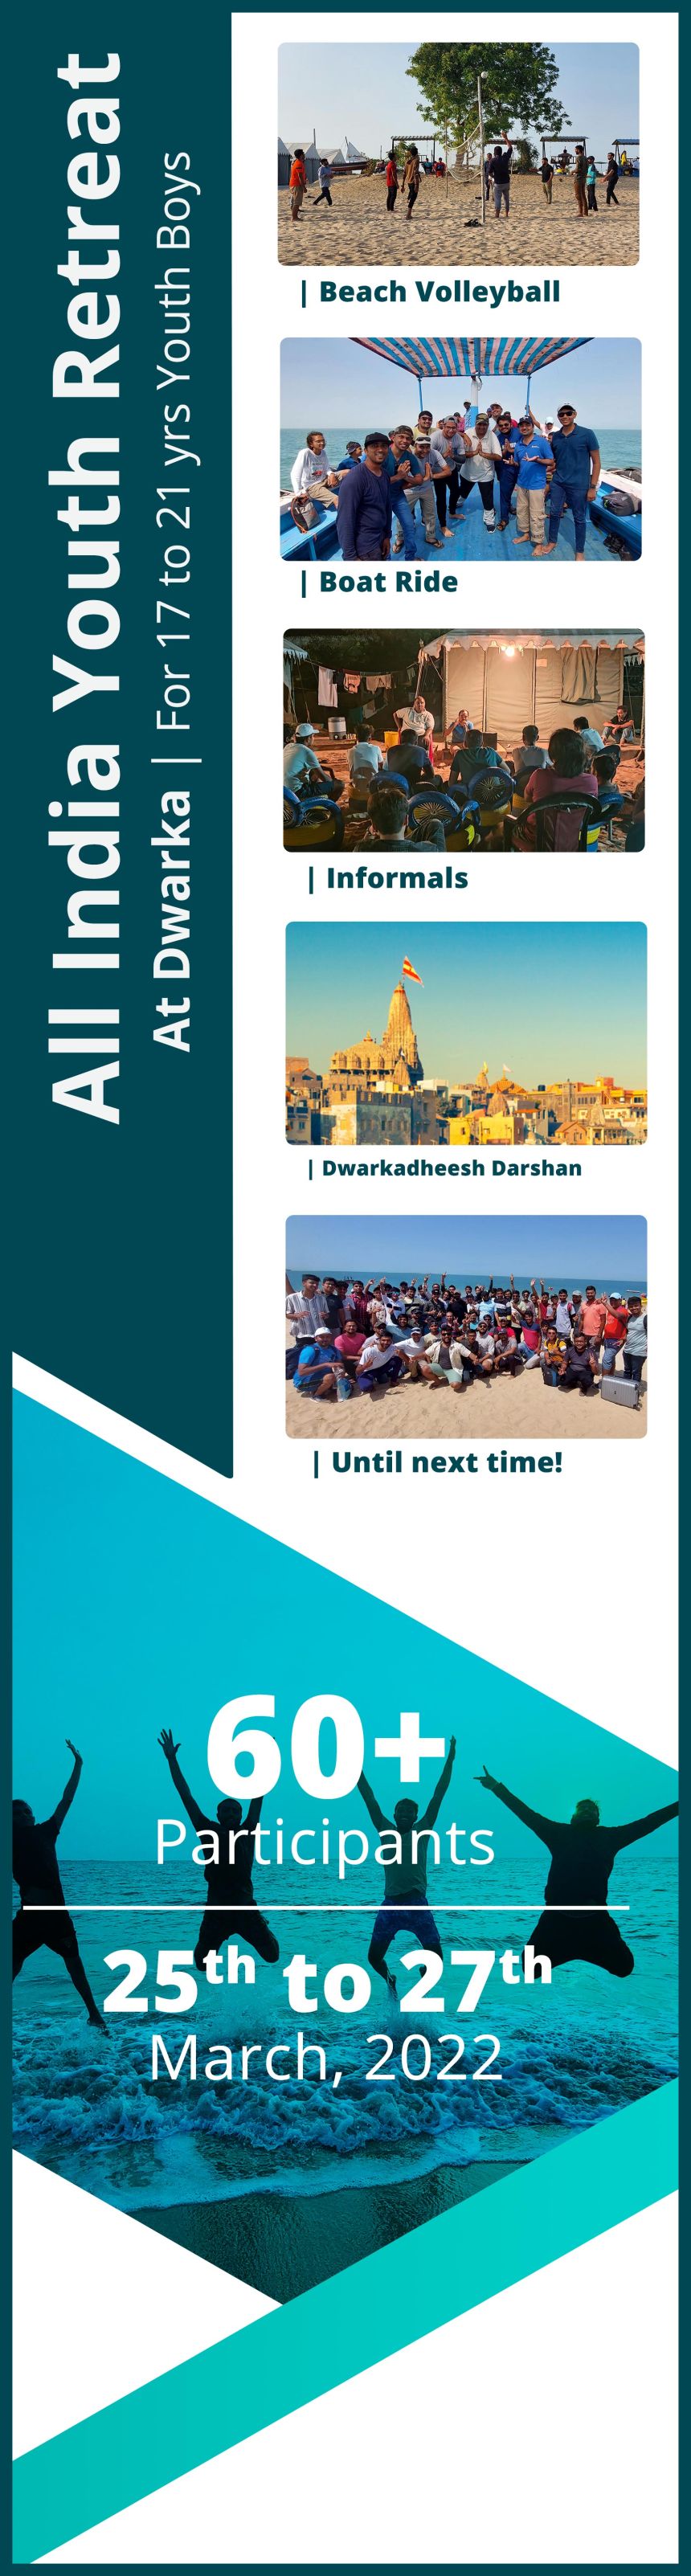 ALL INDIA YOUTH RETREAT FOR 17-21 YBOYS - MARCH 2022